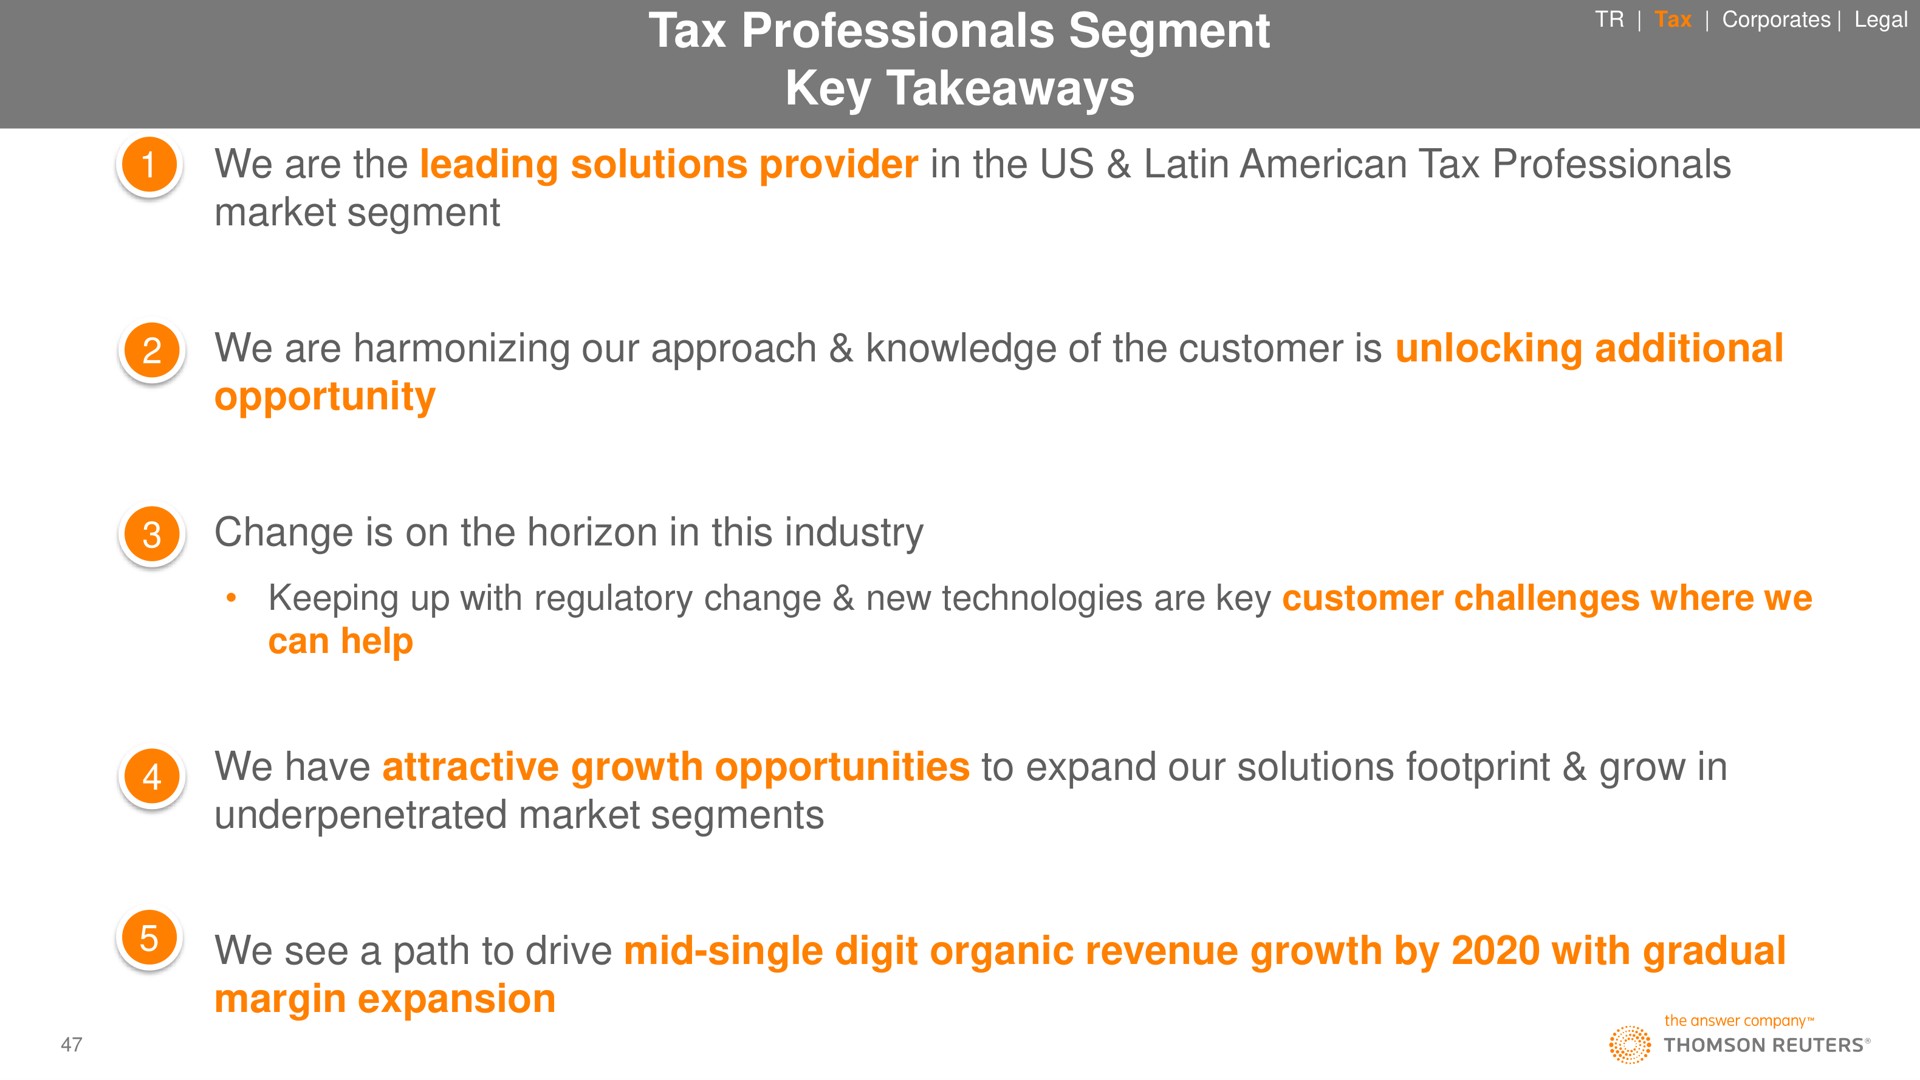 tax professionals segment key we are the leading solutions provider in the us tax professionals market segment we are harmonizing our approach knowledge of the customer is unlocking additional opportunity change is on the horizon in this industry we have attractive growth opportunities to expand our solutions footprint grow in market segments we see a path to drive mid single digit organic revenue growth by with gradual margin expansion | Thomson Reuters